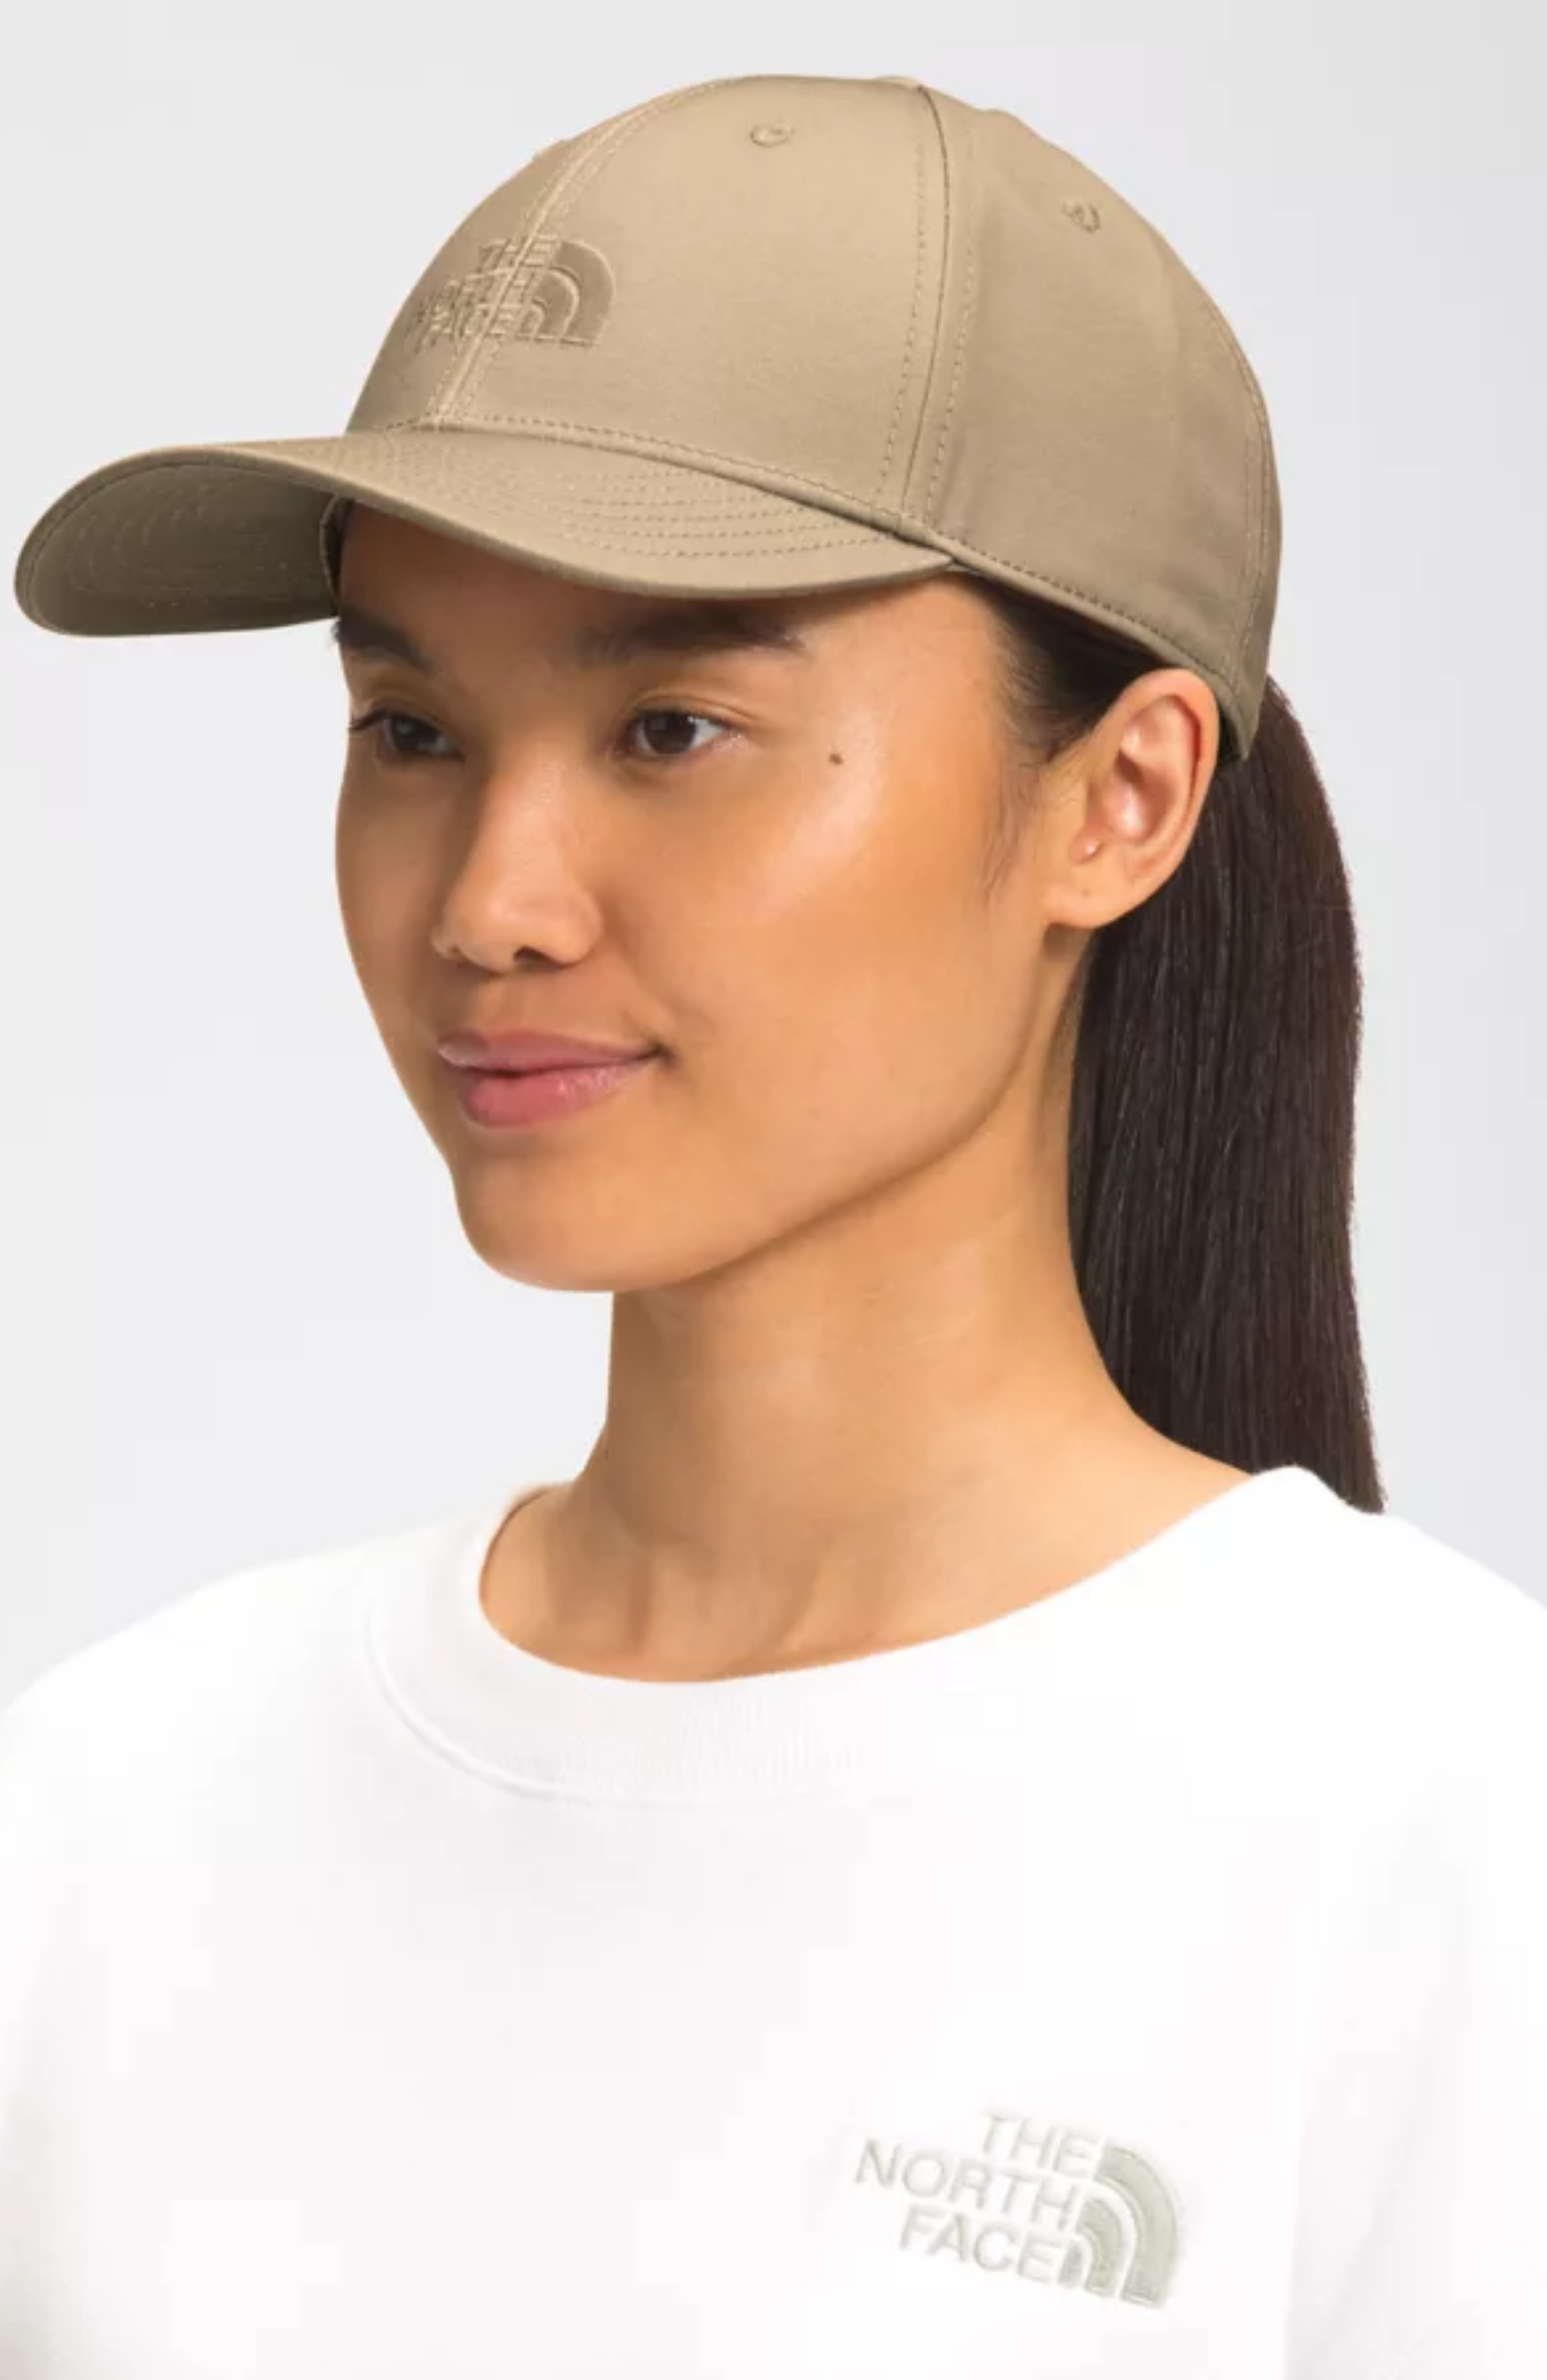 NF0A4VSV RECYCLED 66 CLASSIC HAT NORTH FACE – 310 Rosemont